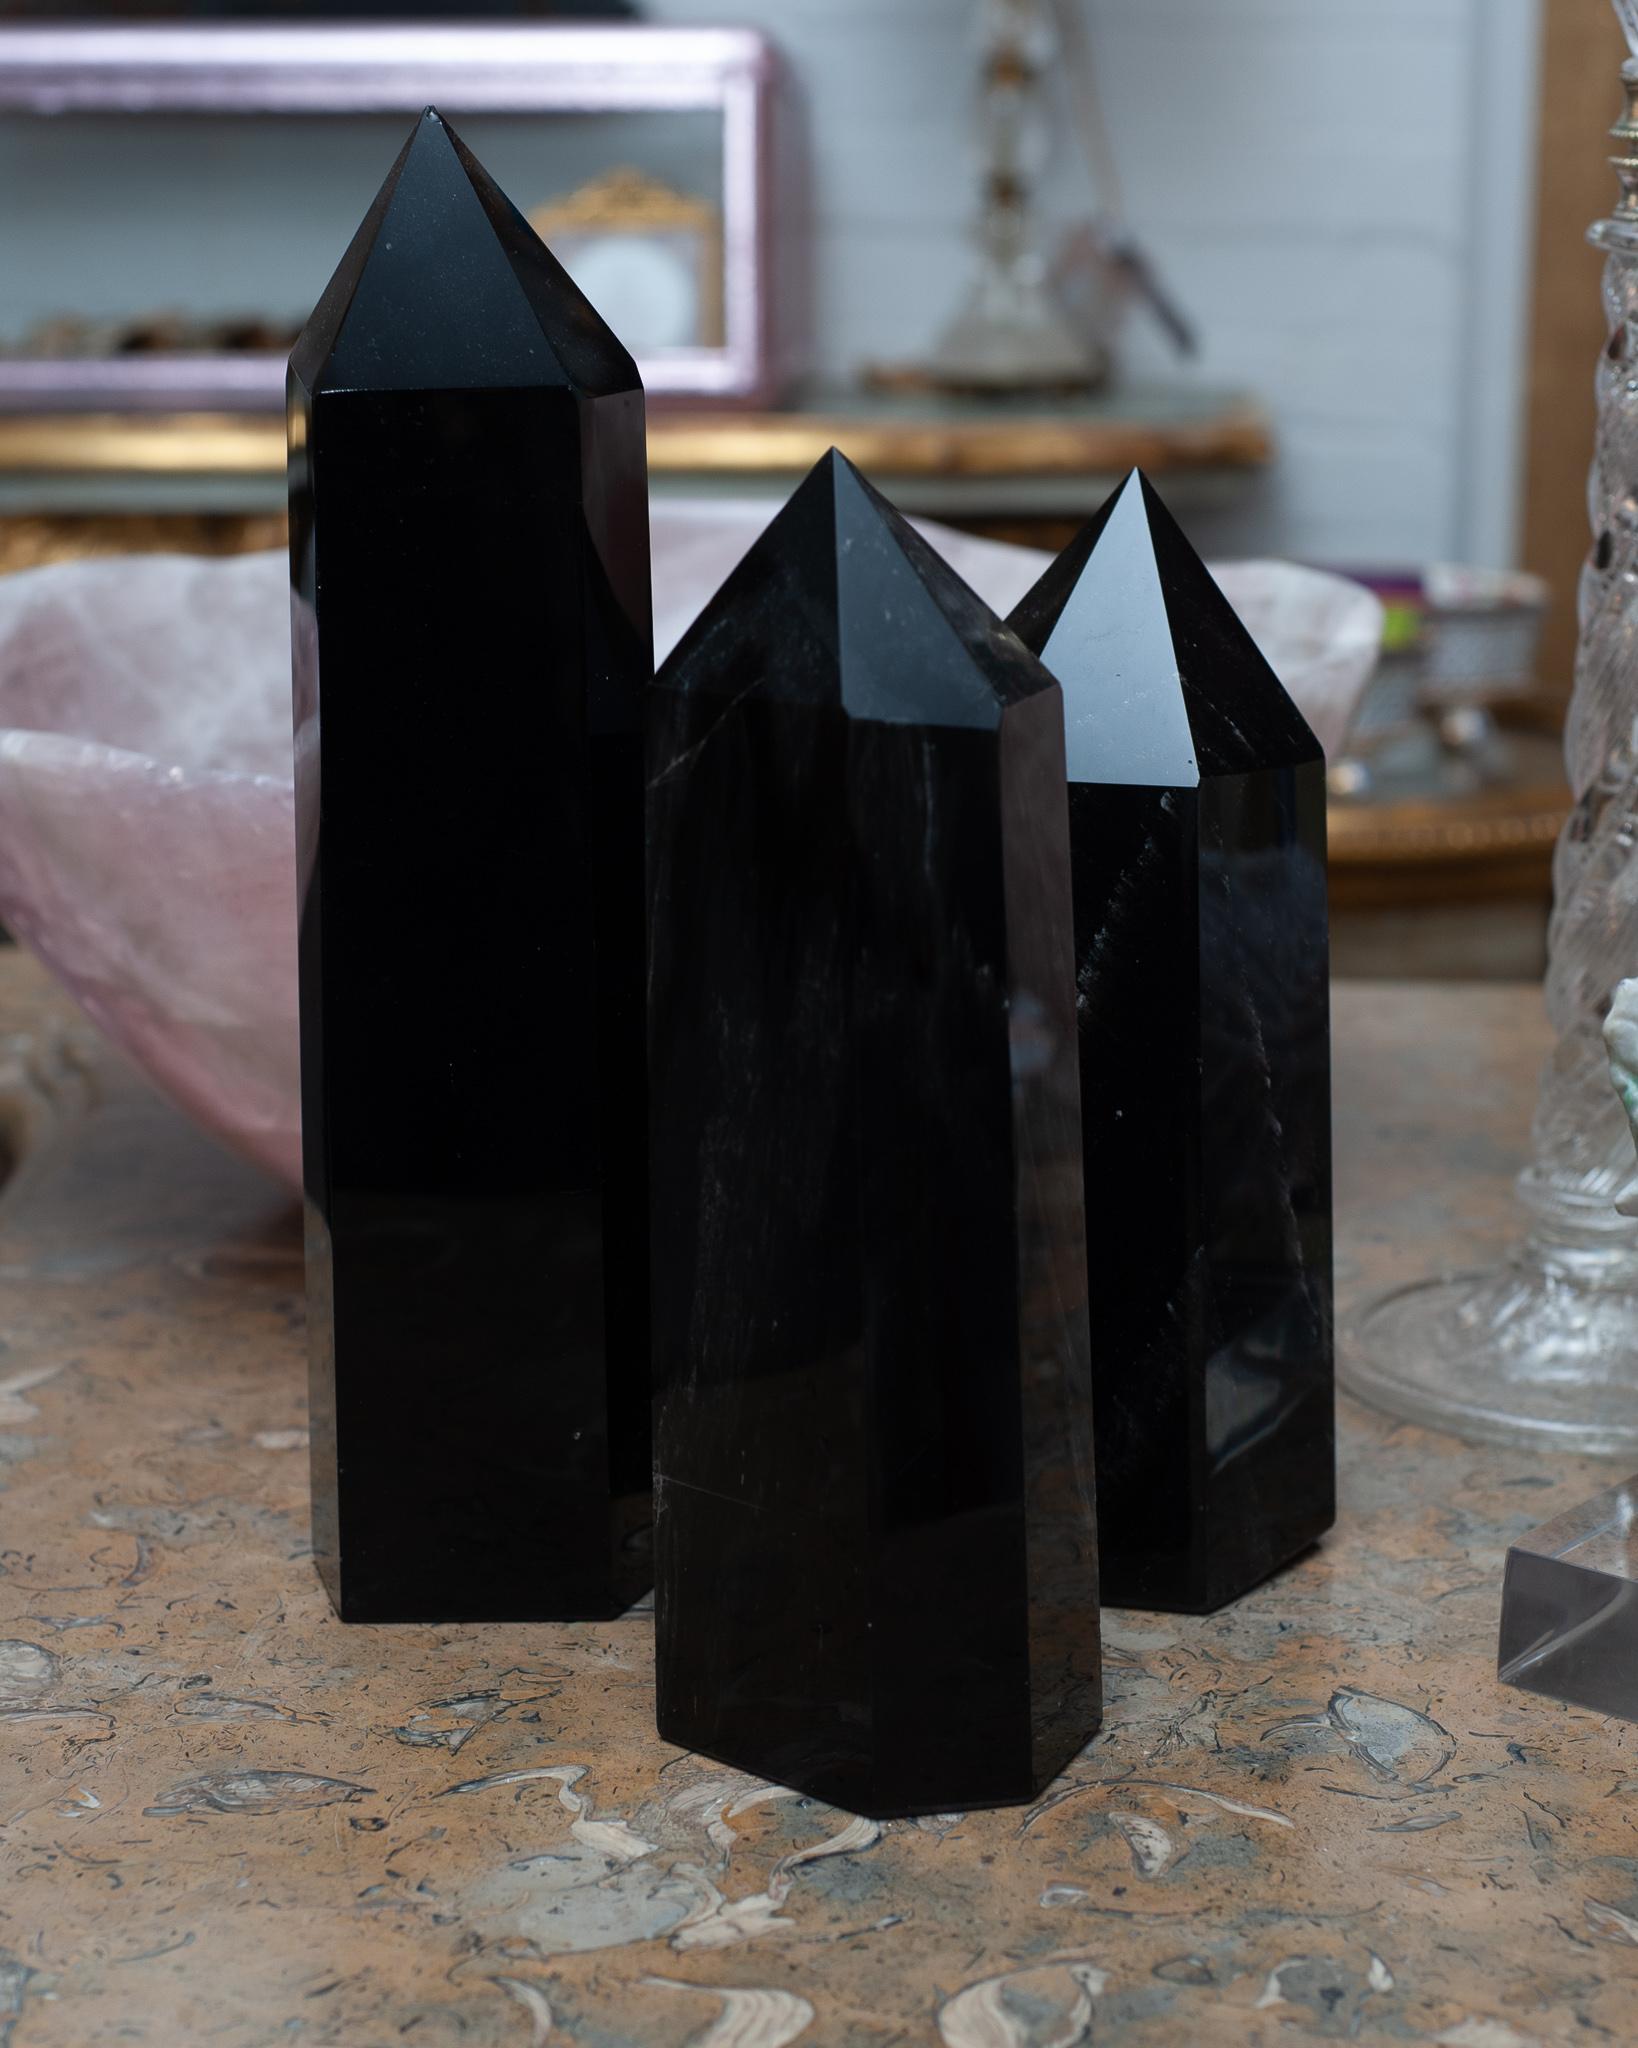 Invite healing energy into your home with a contemporary group large black obsidian crystal points / obelisks. Obelisks are symbols of protection, defence and stability. Crystal points are often used to direct energies through the apex of a point.